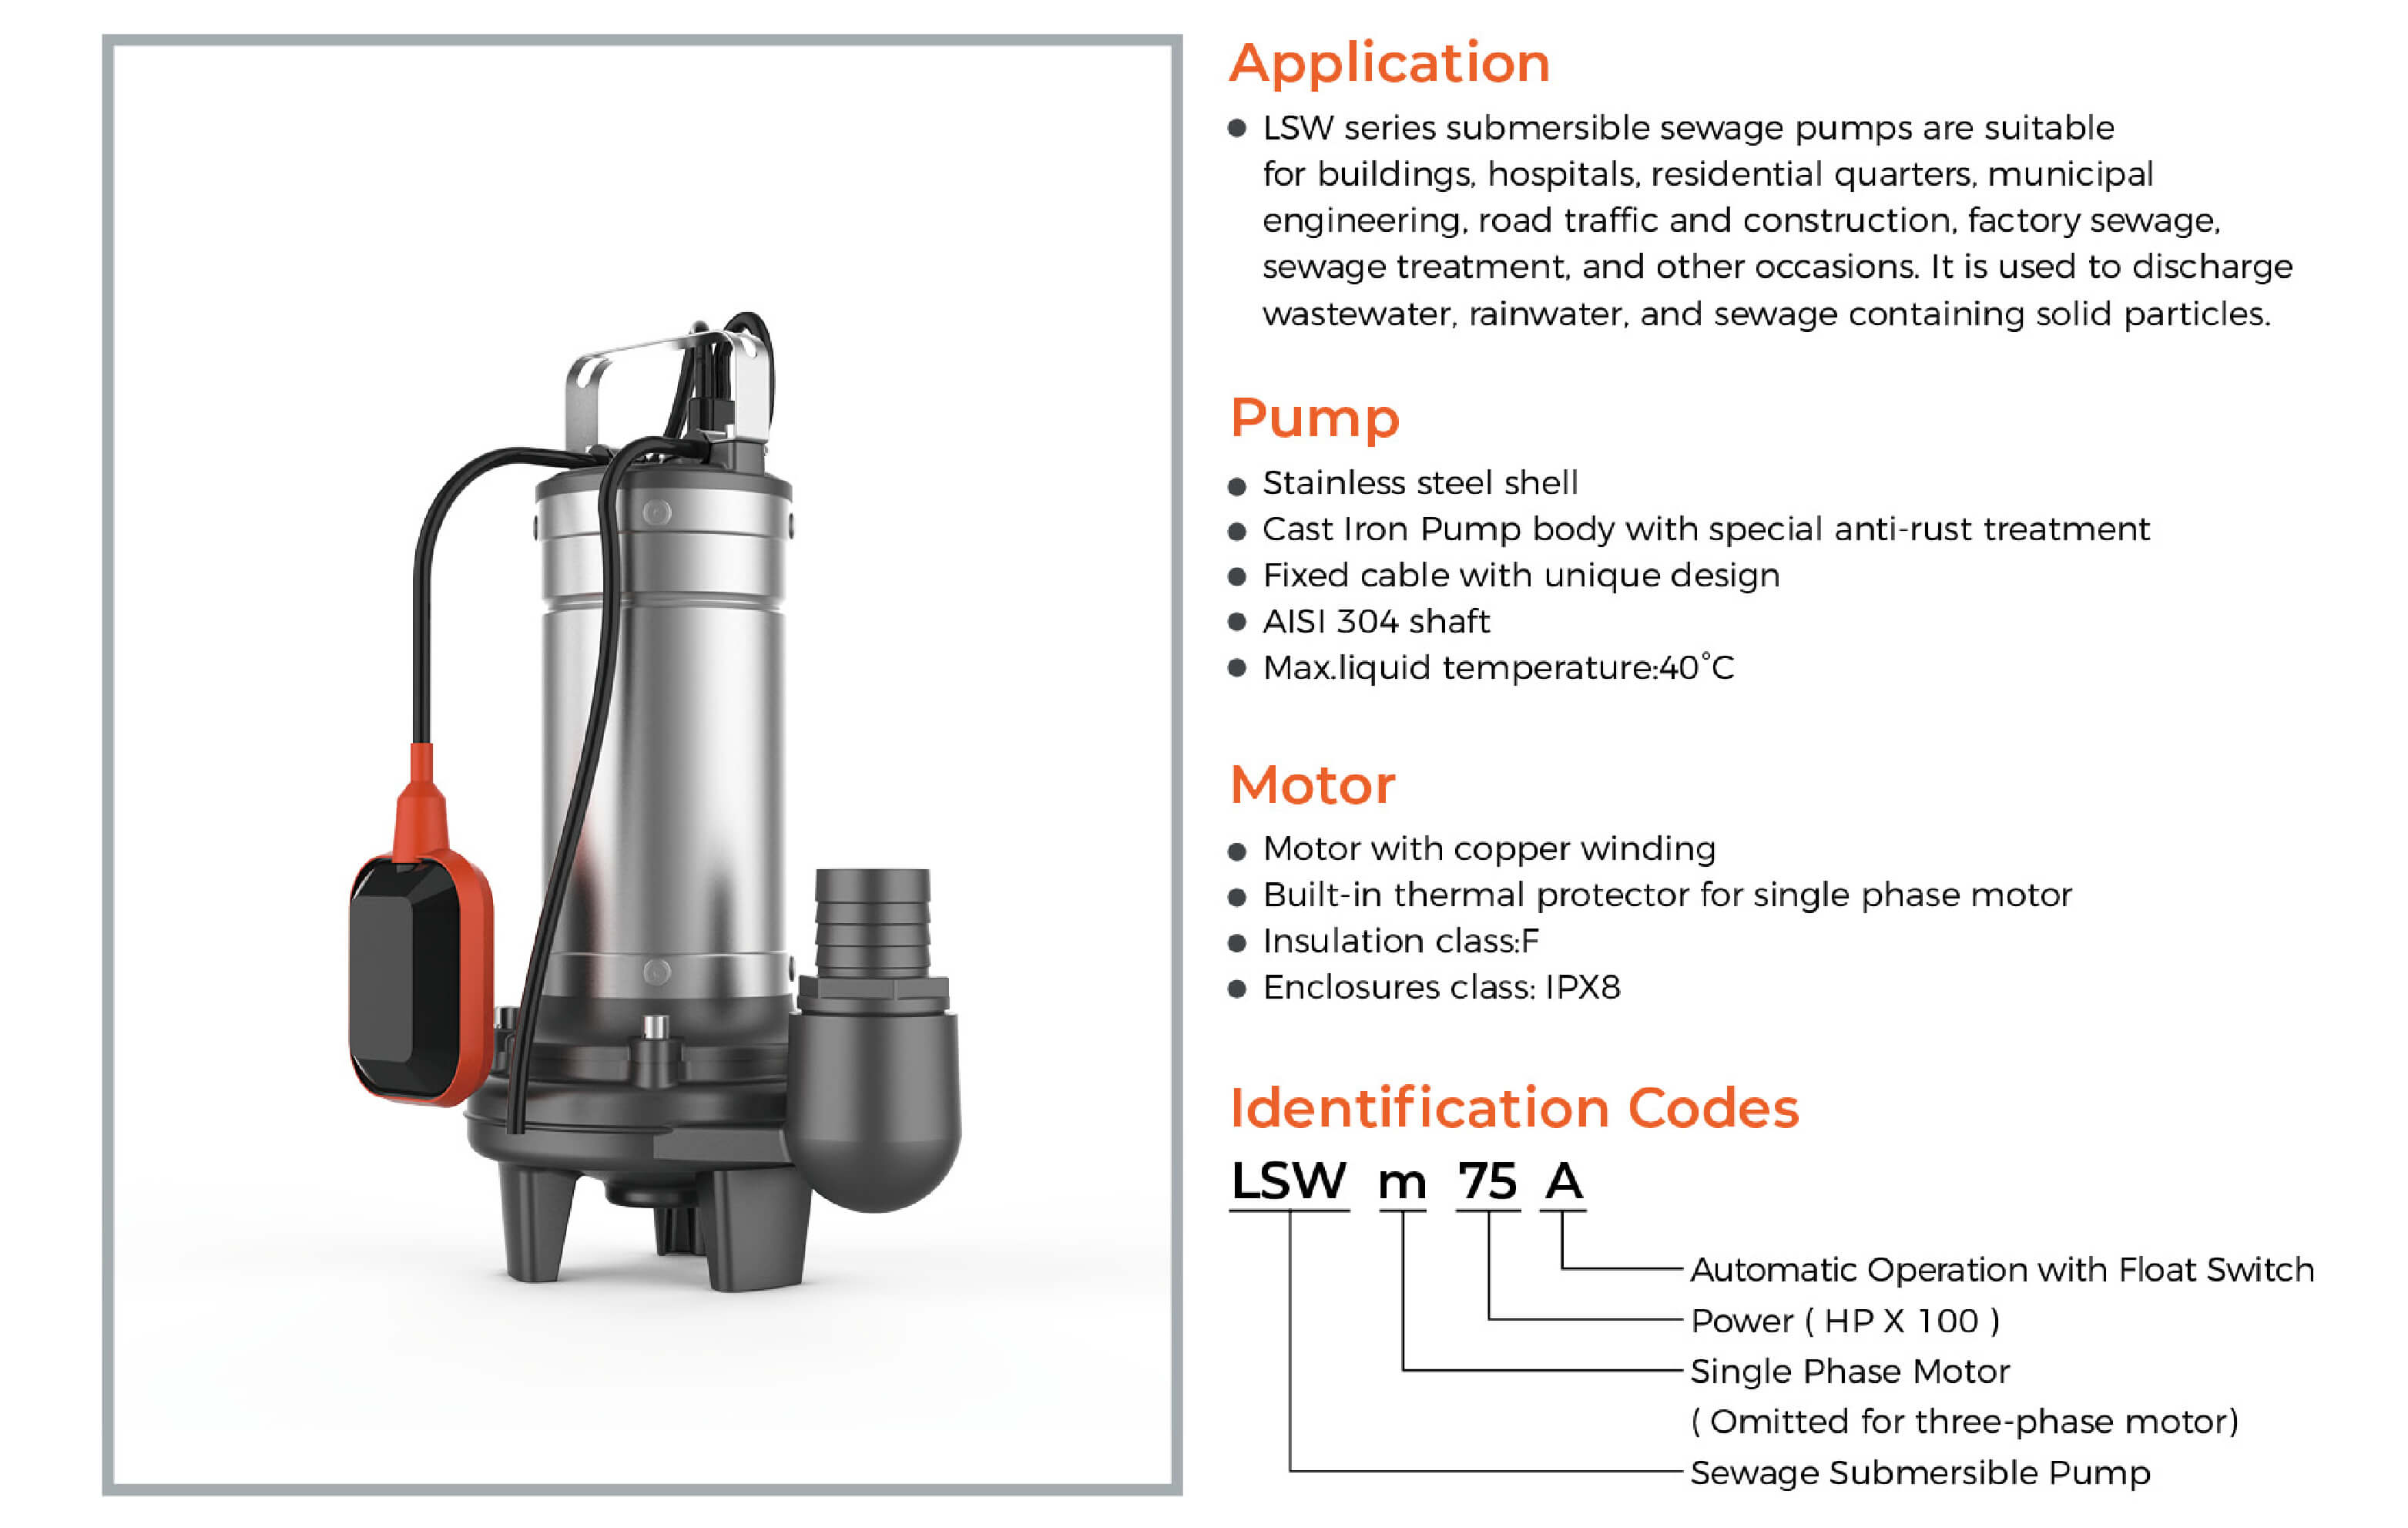 LSW Sewage Submersible Pump Features